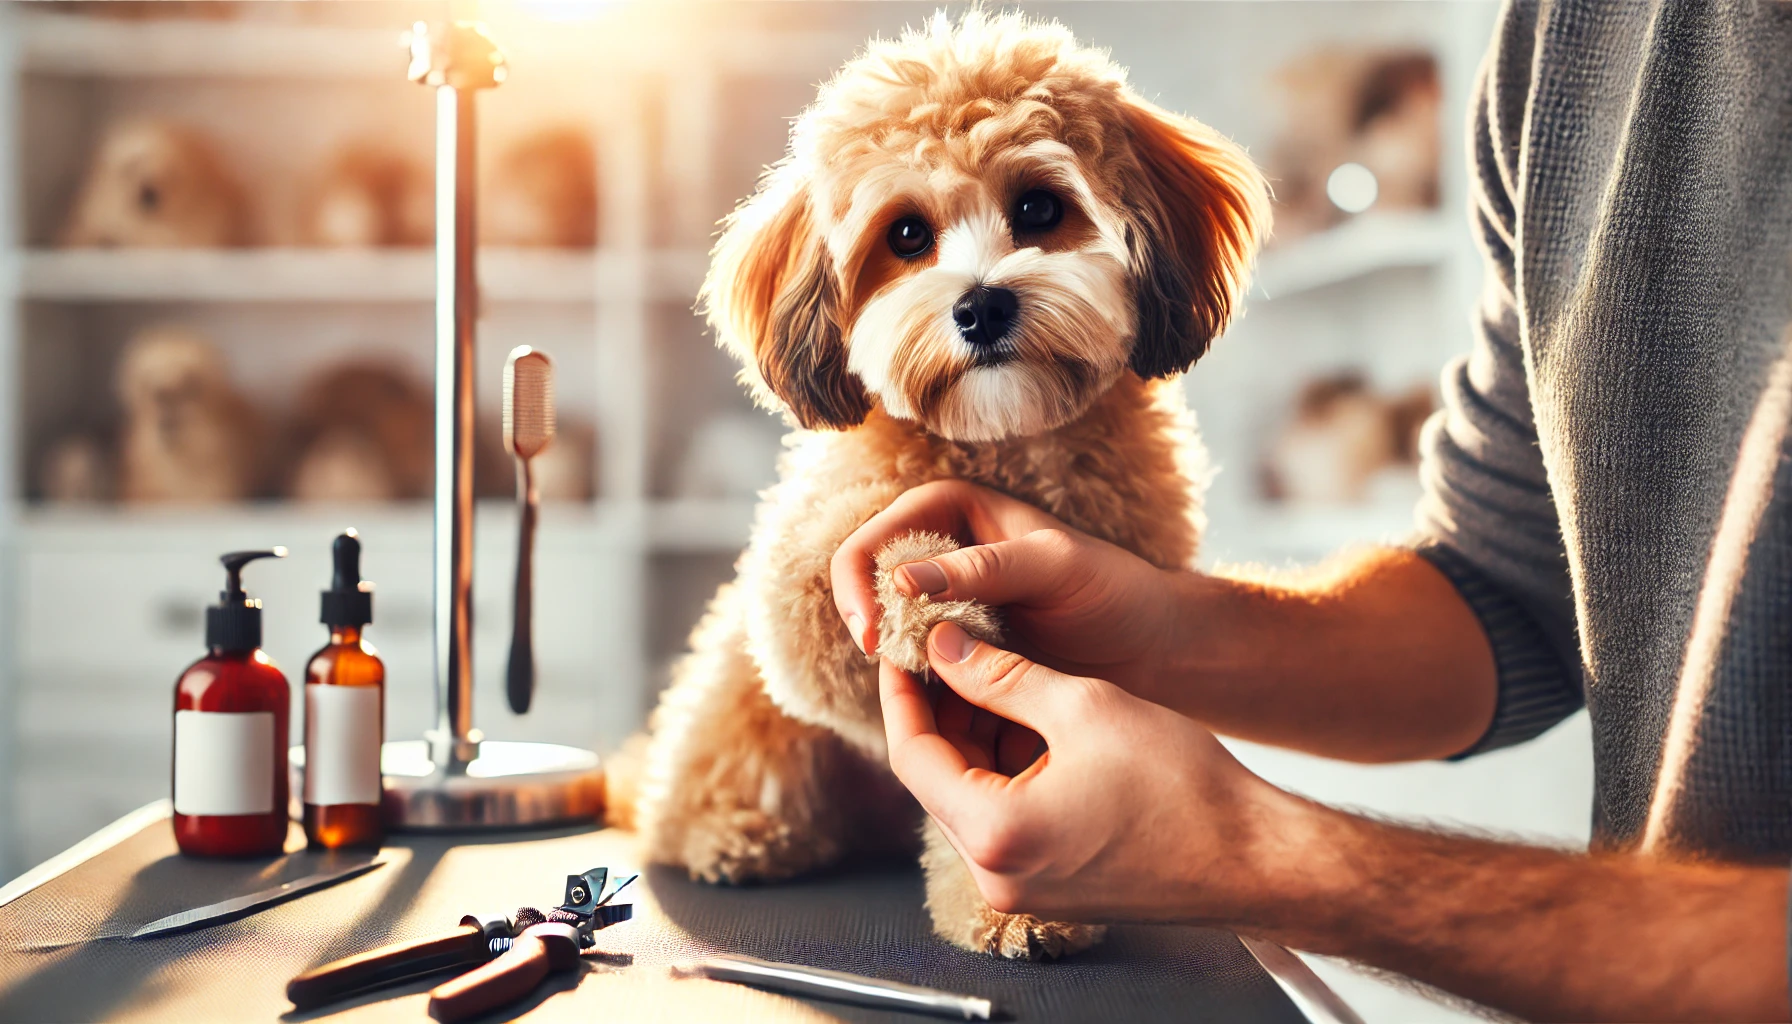  image of a small Maltipoo having its nails trimmed. The Maltipoo has one paw in a person's hand